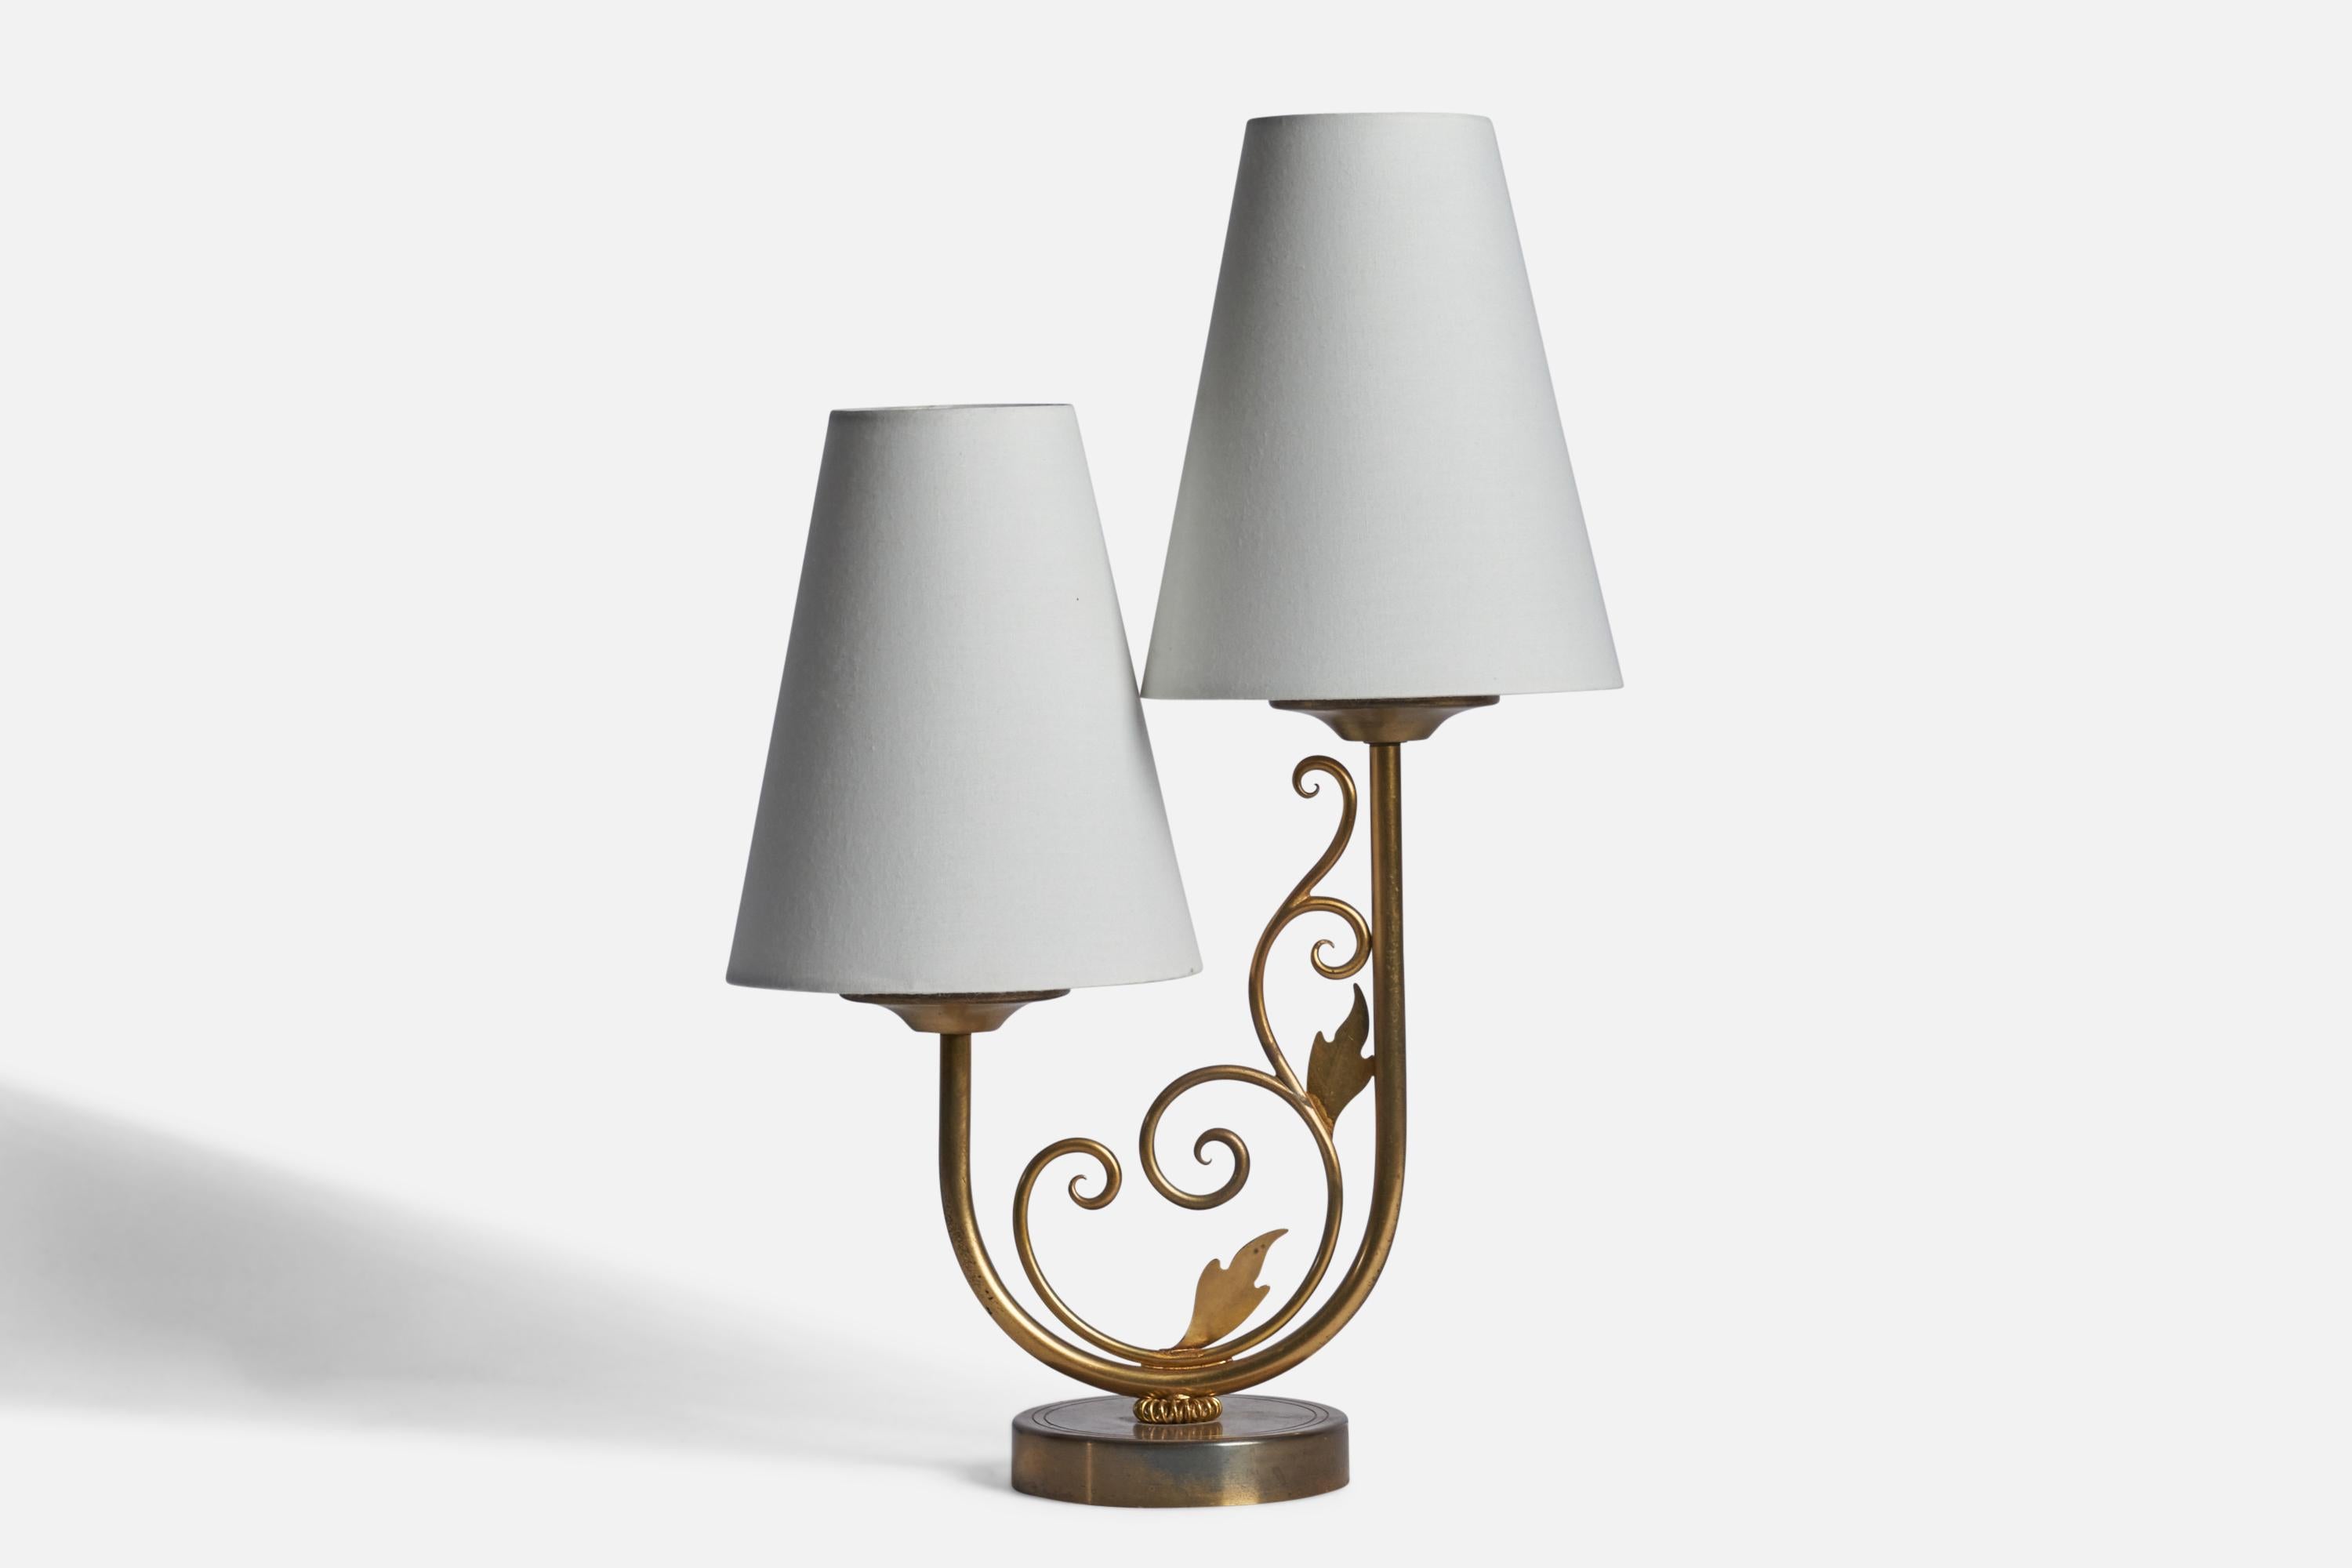 
A two-armed brass and white fabric table lamp designed and produced in Denmark, 1940s.
Overall Dimensions (inches): 15.65